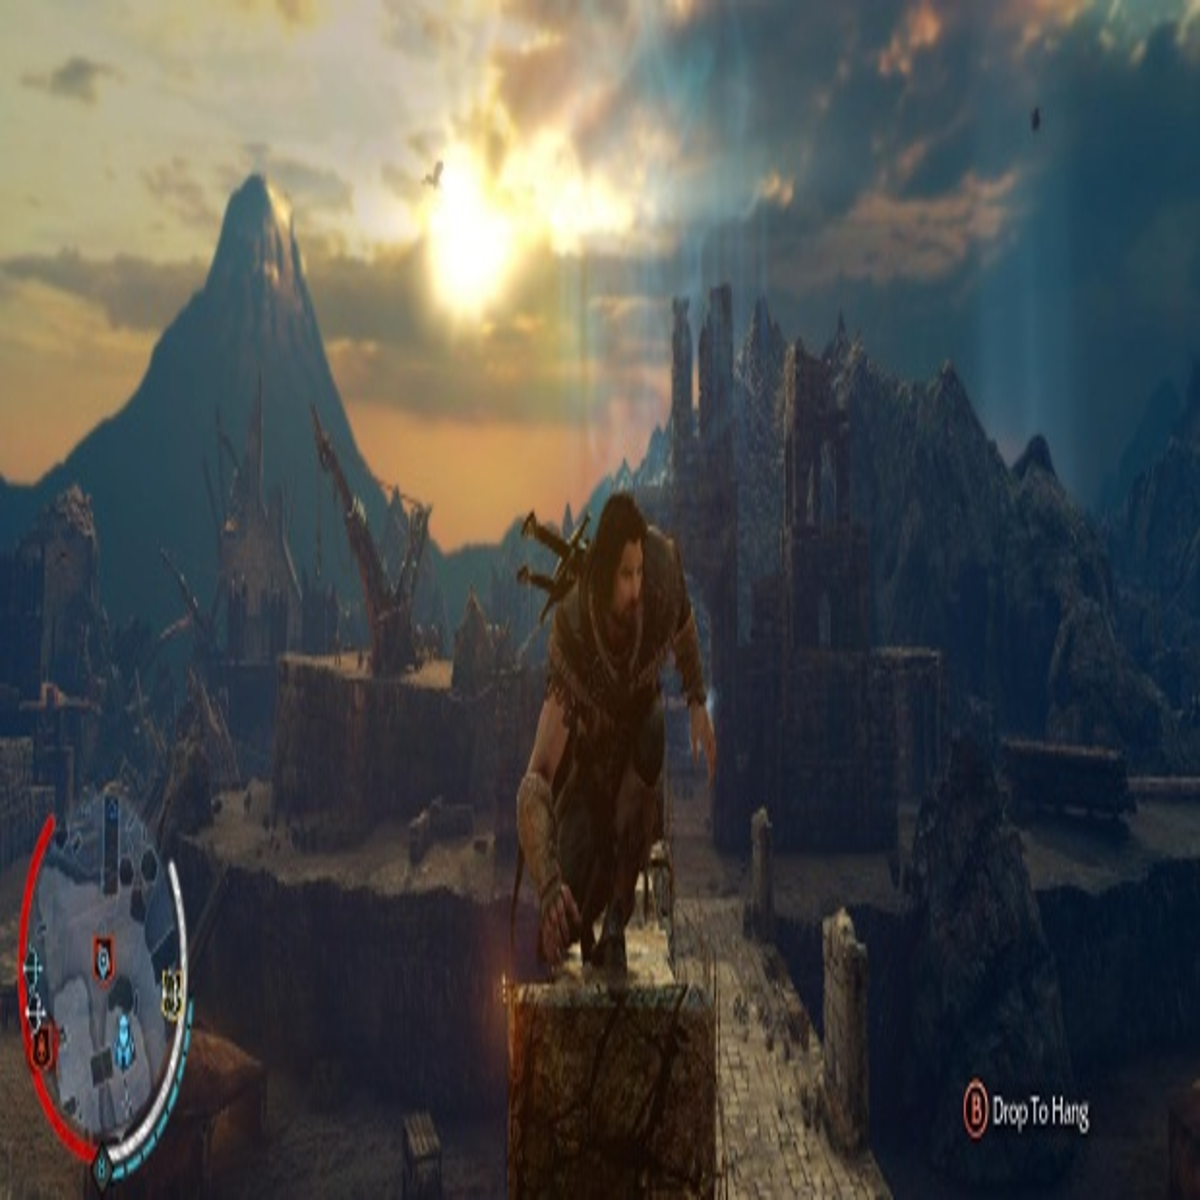 Middle-earth: Shadow of Mordor originally featured a giant, climbable beast